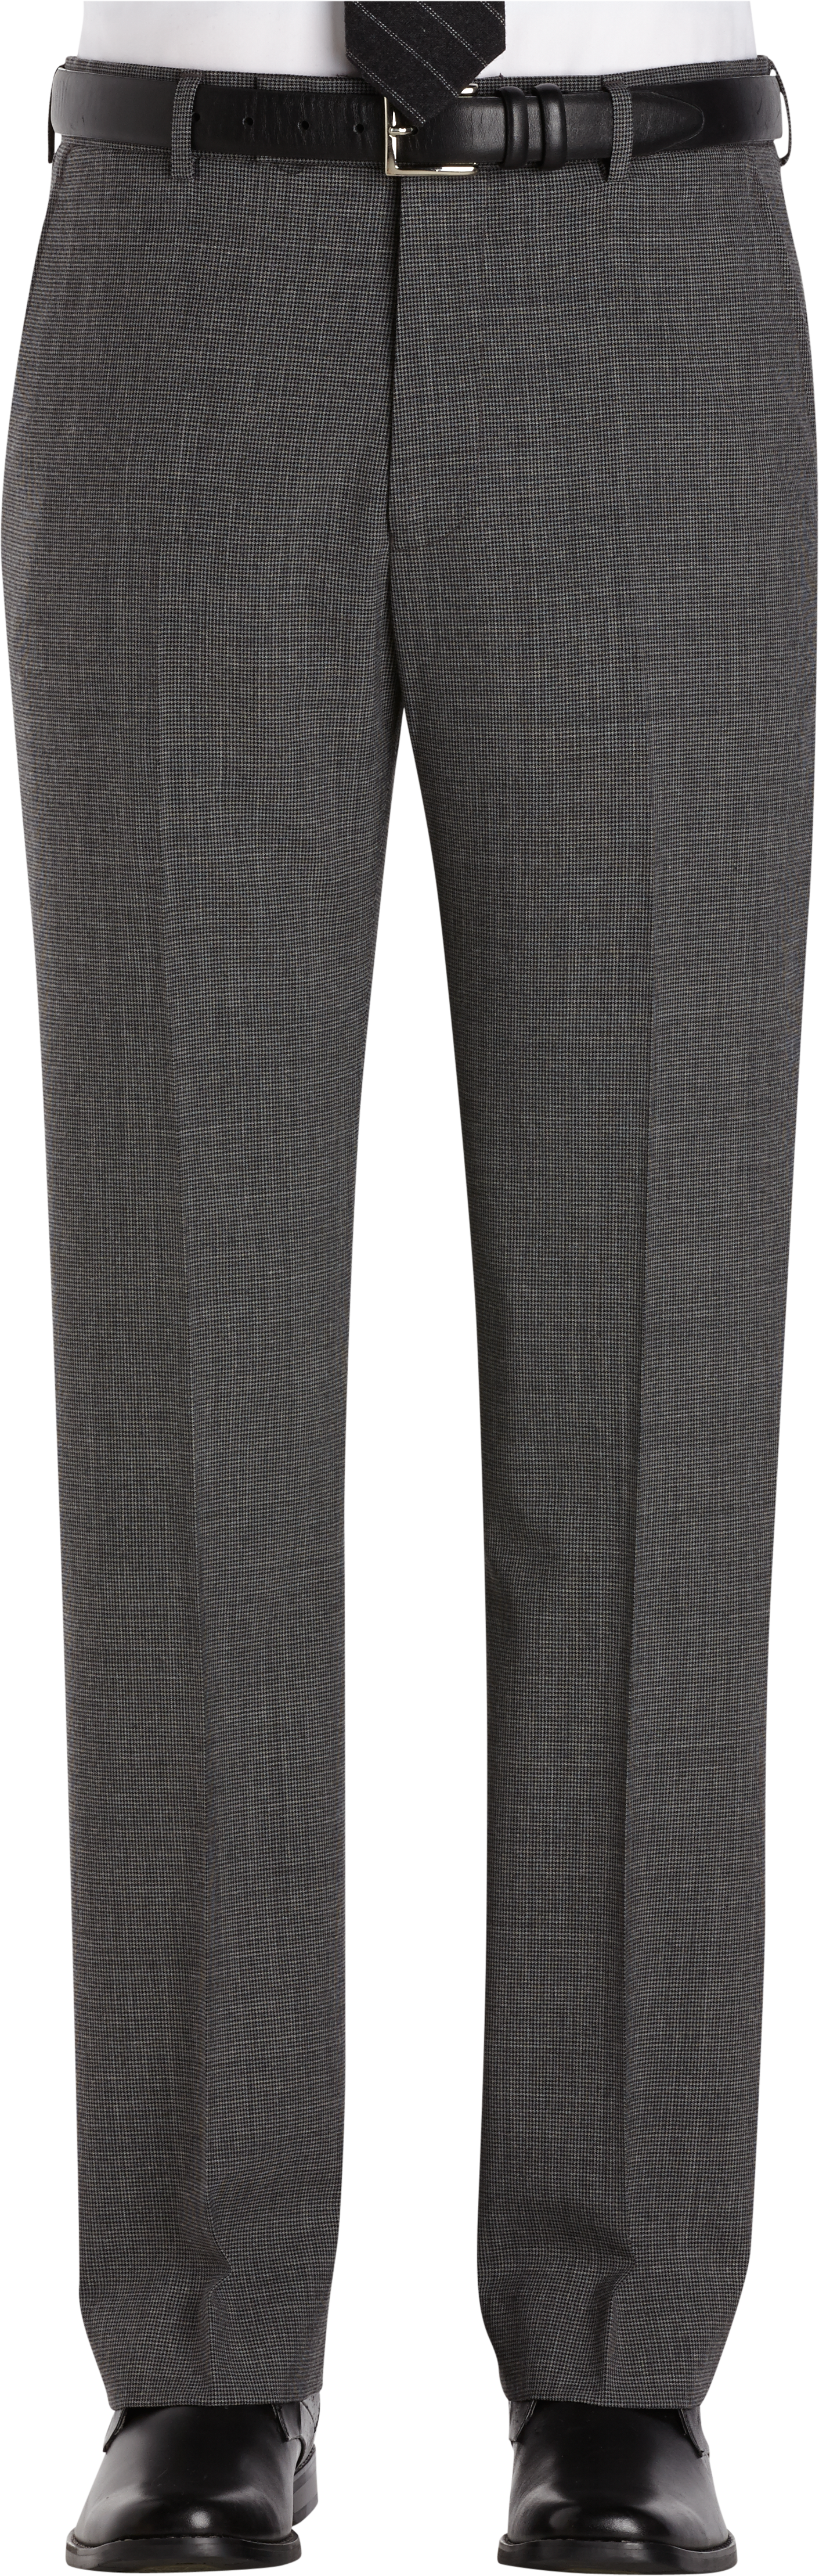 Nautica Gray Houndstooth Classic Fit Dress Pants - Men's Classic Fit ...